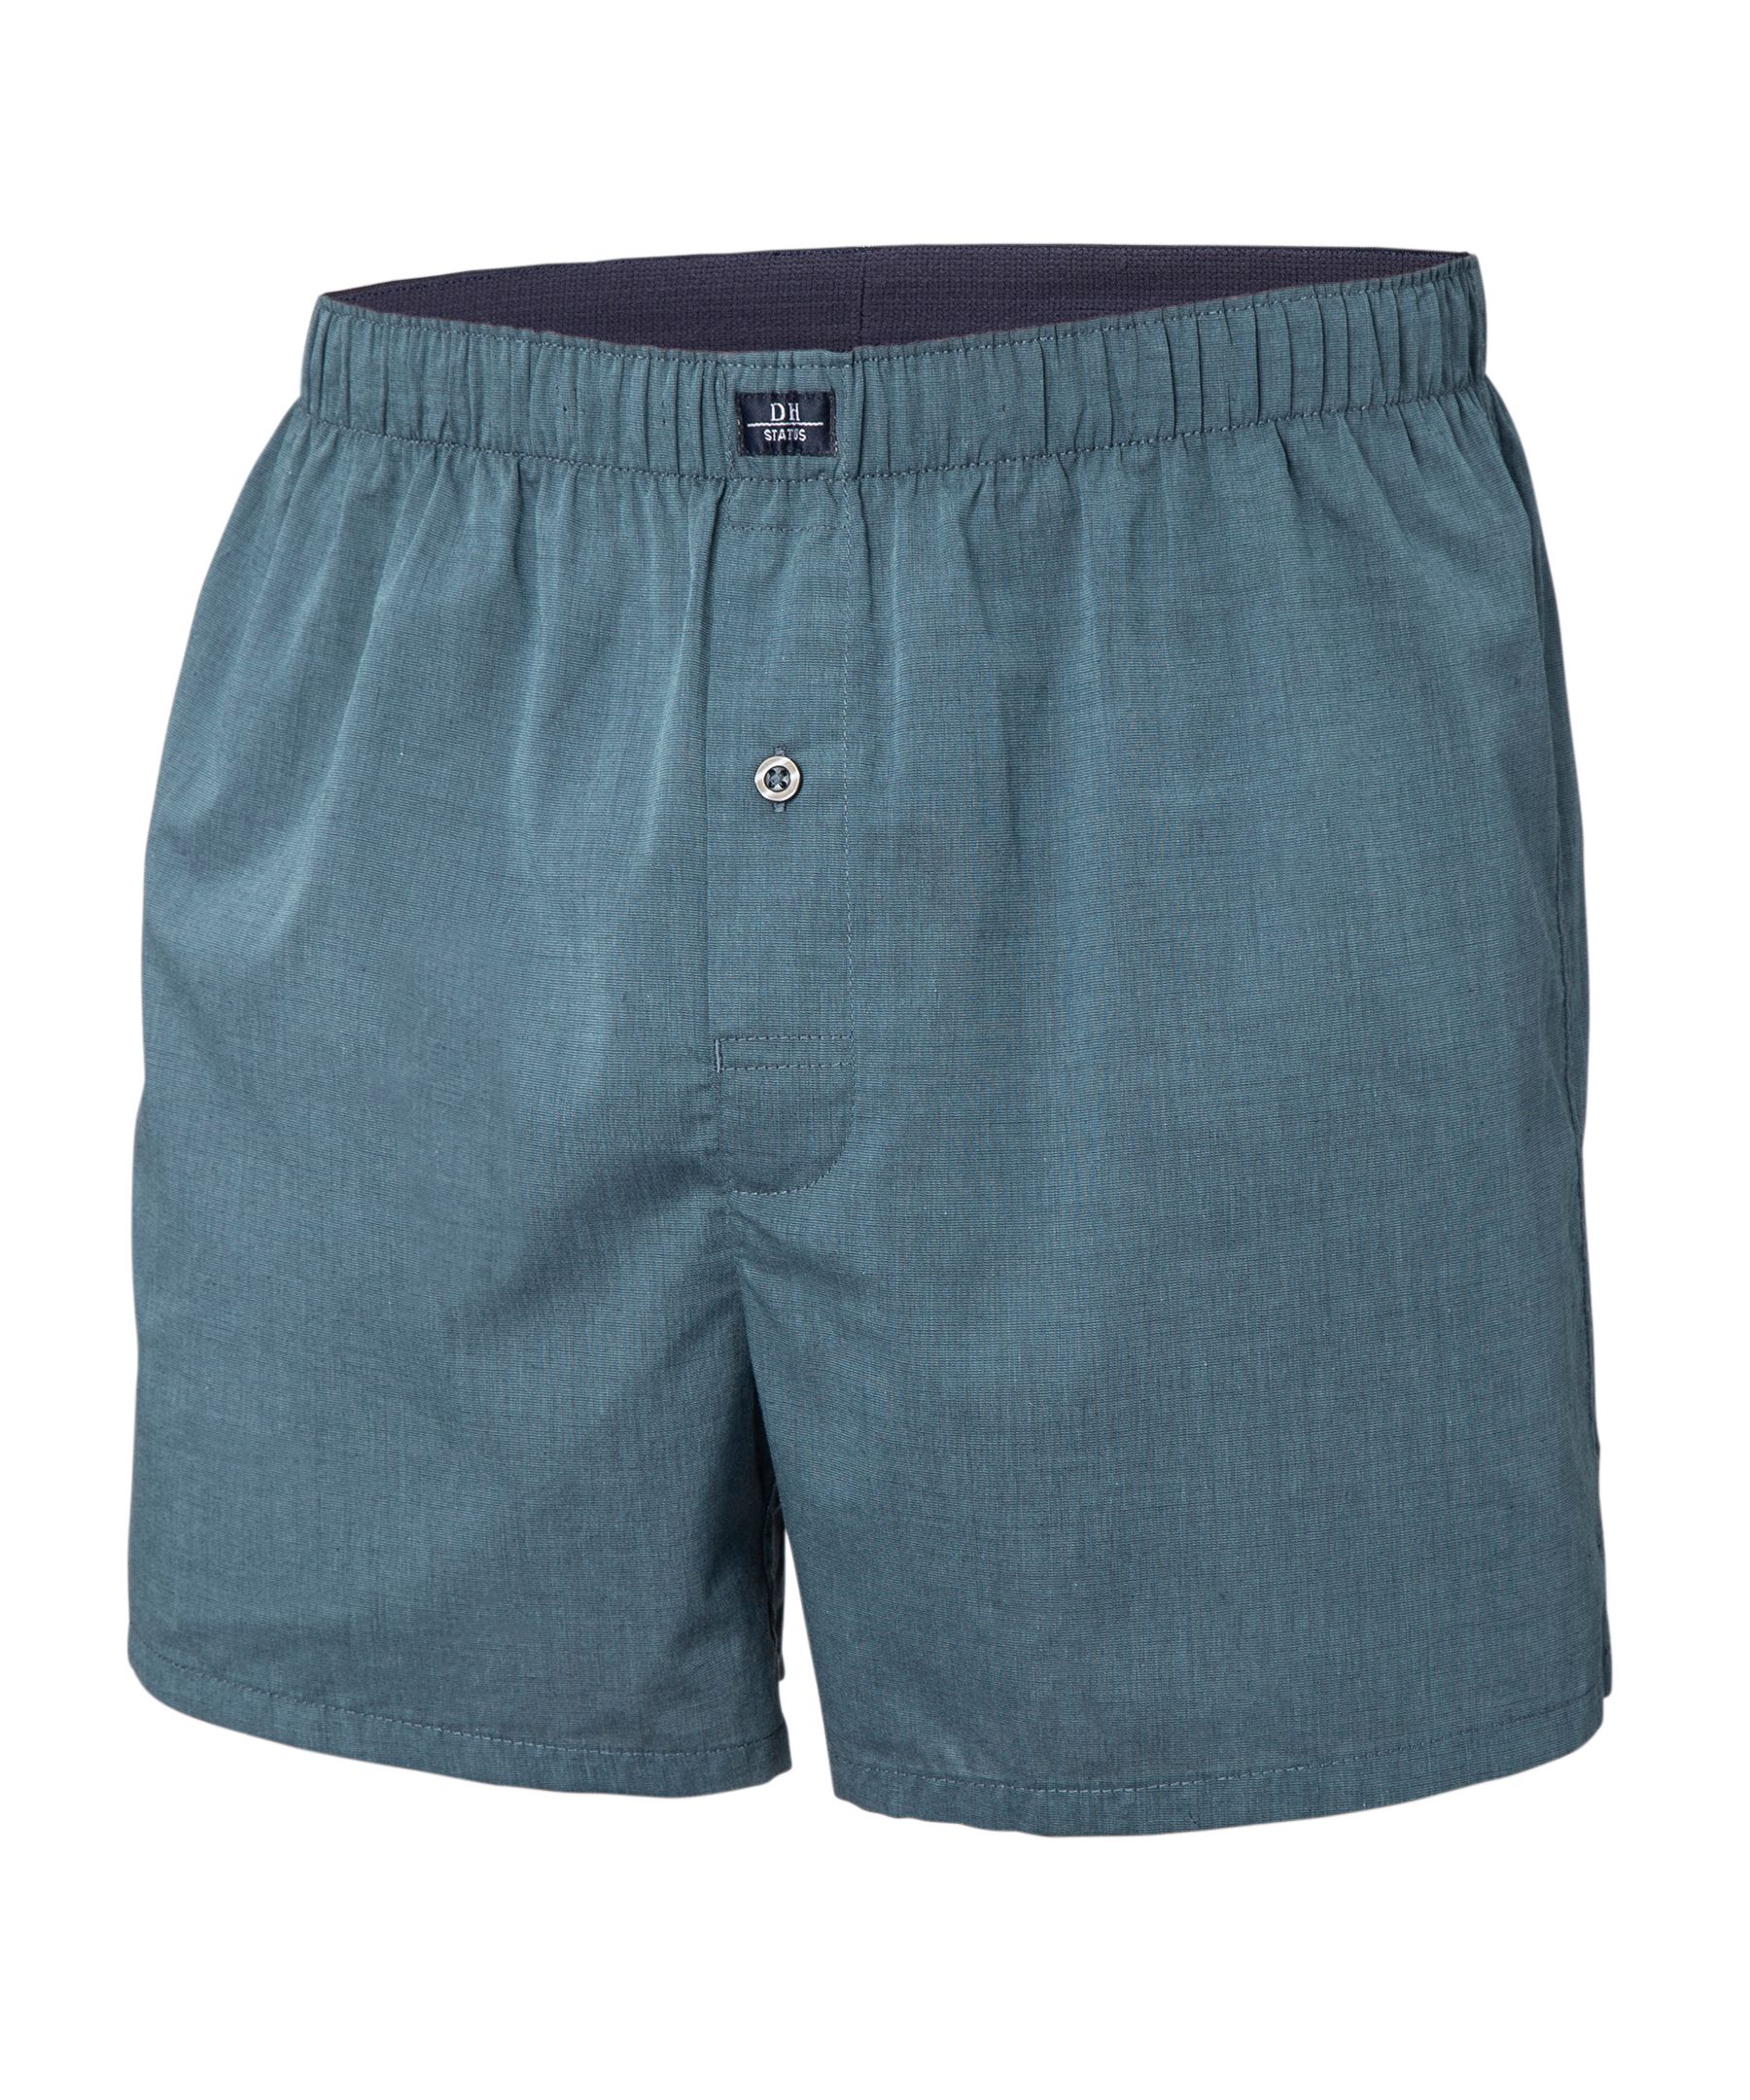 Woven Boxer 2 Pack